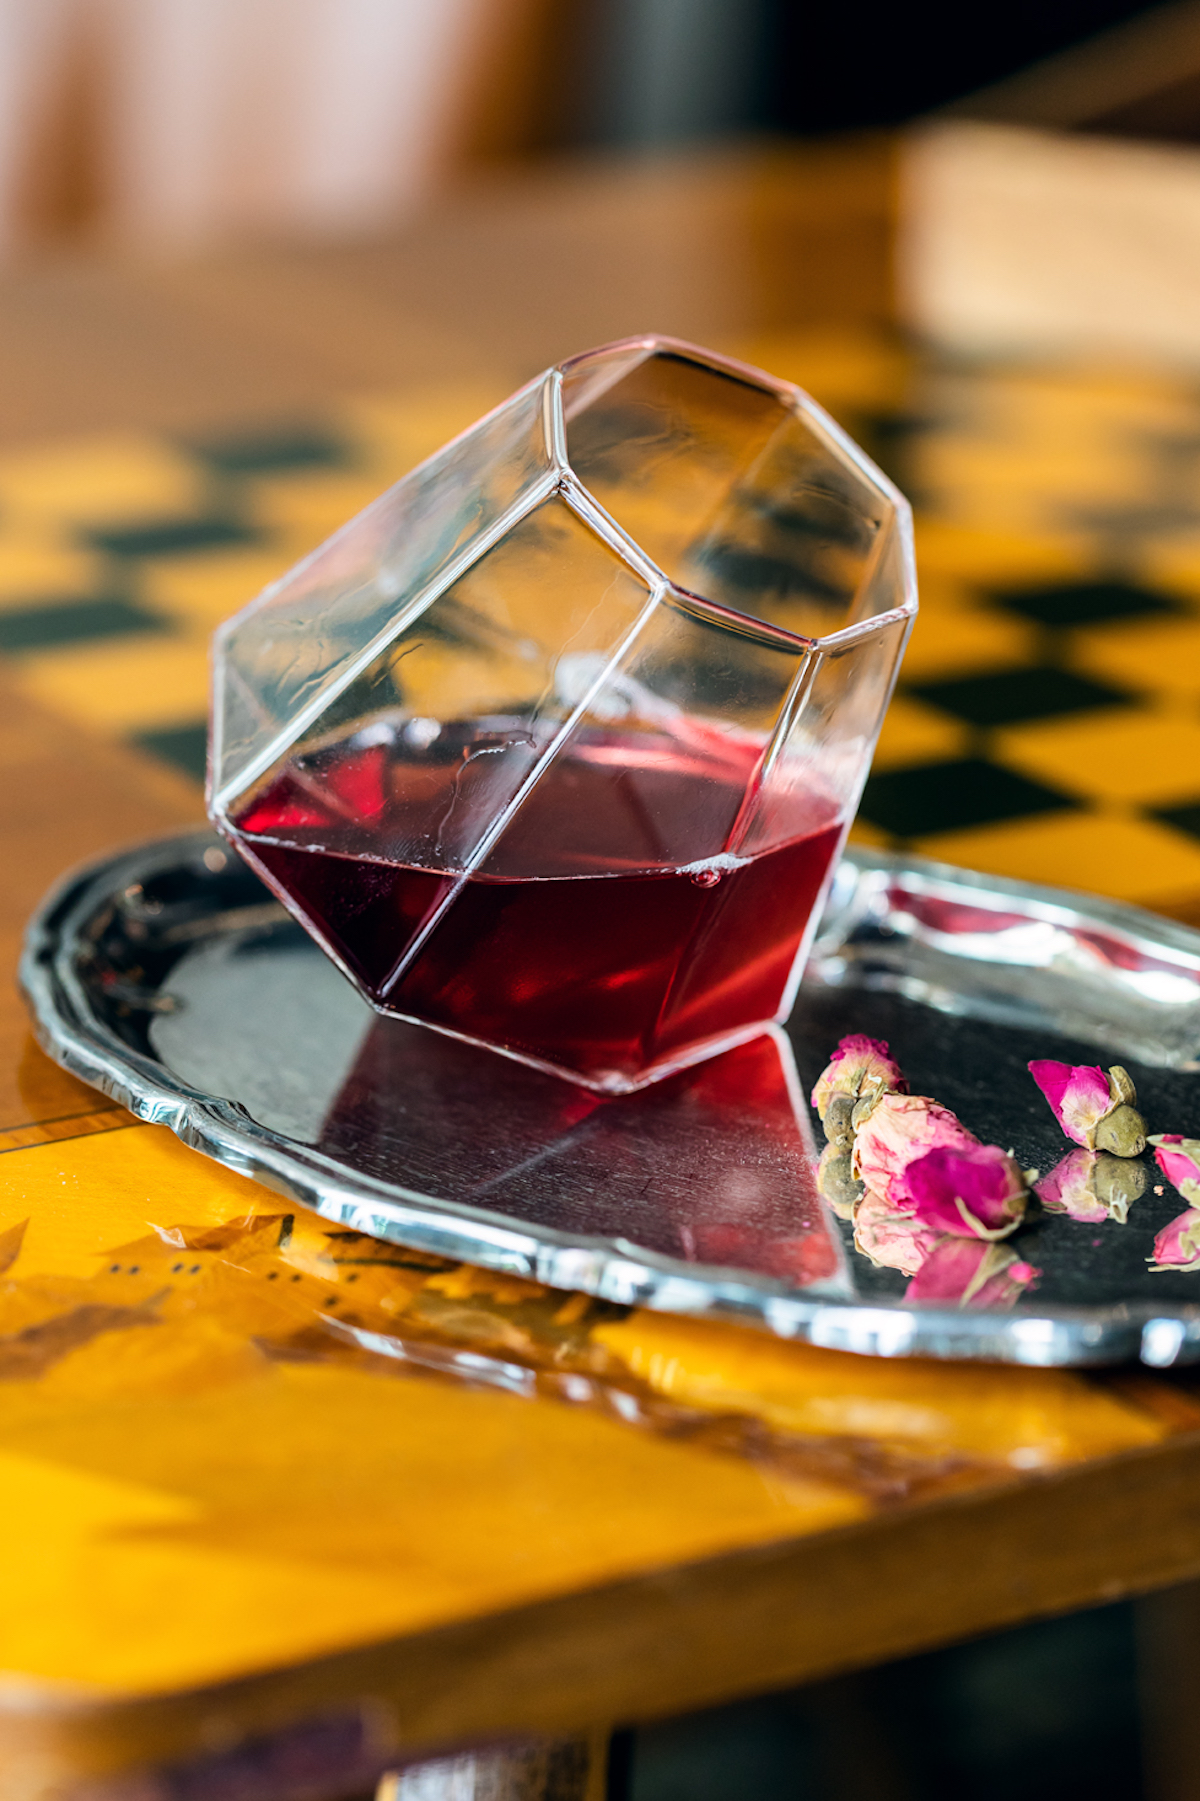 Blood Diamond by Armin Azadpour found at The Pouring Tales